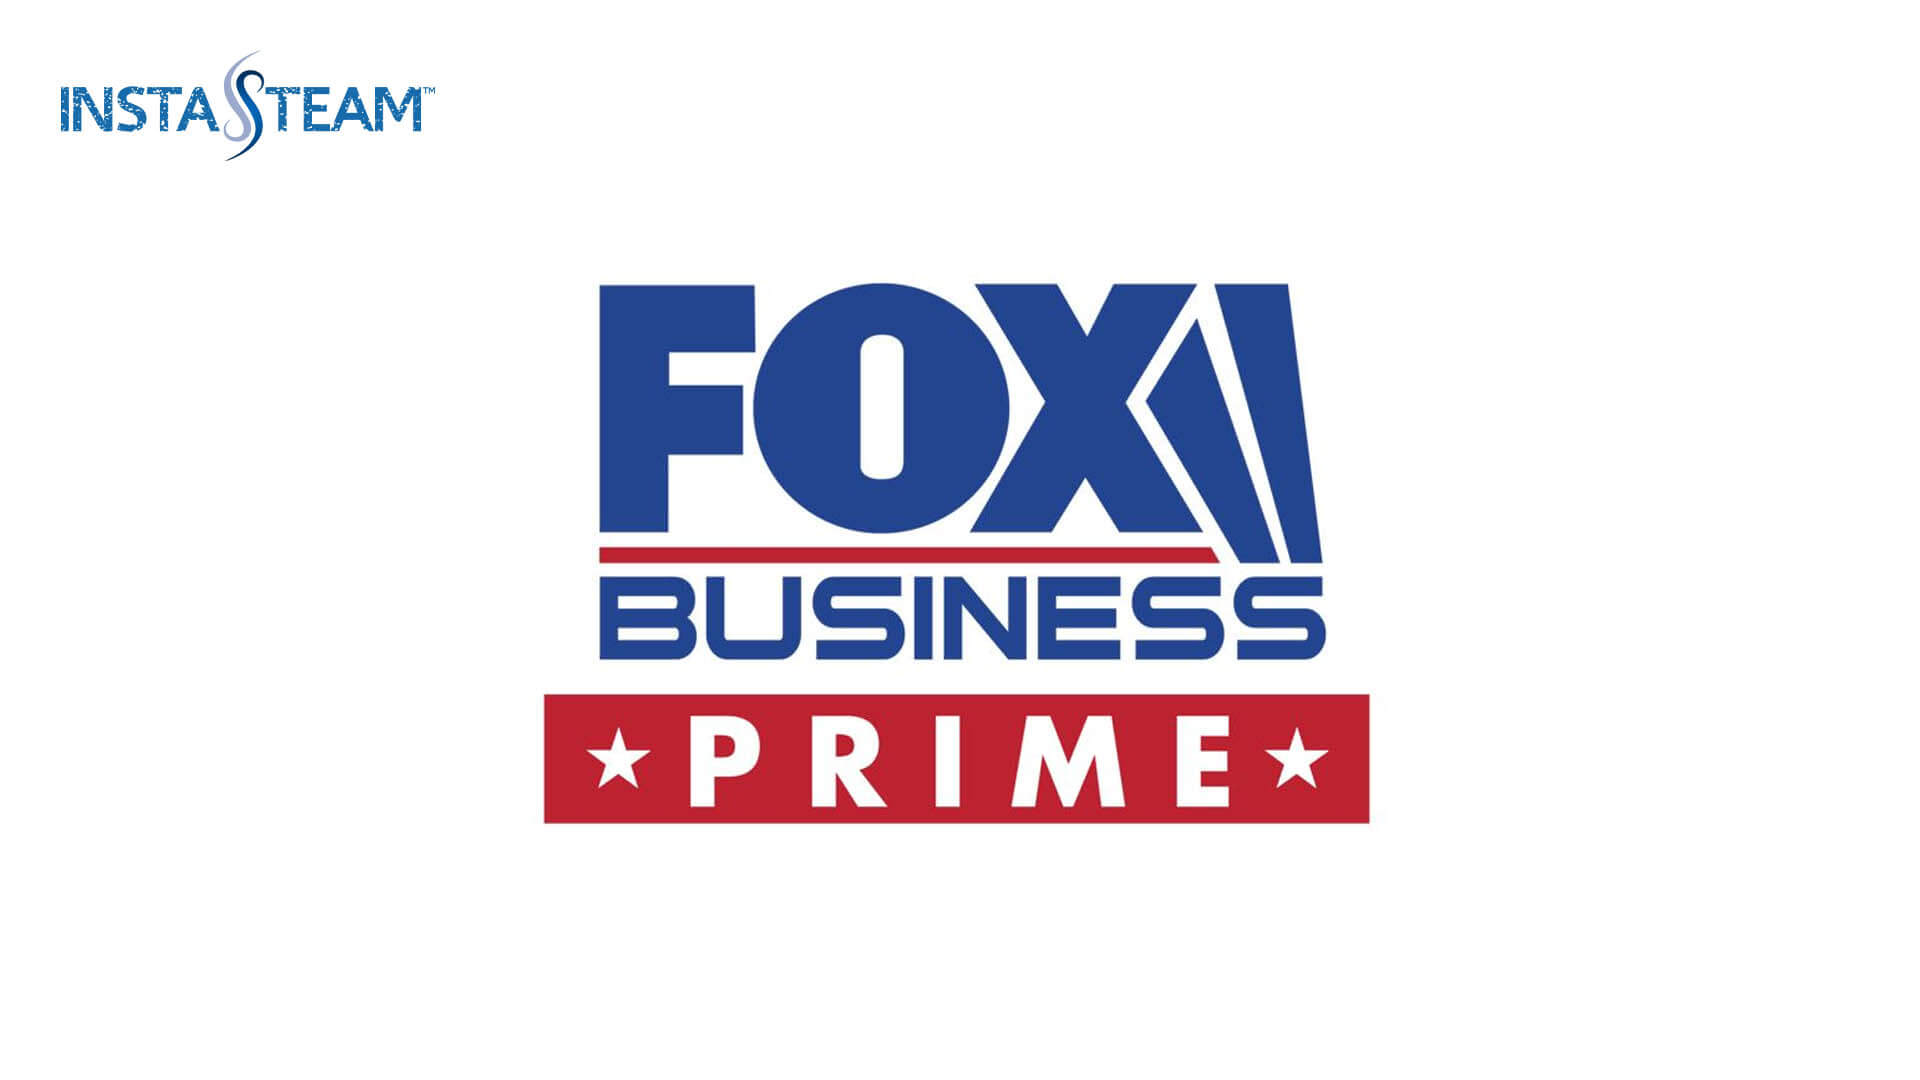 FOX Business Network to Debut Second Season of FBN Prime on April 25th